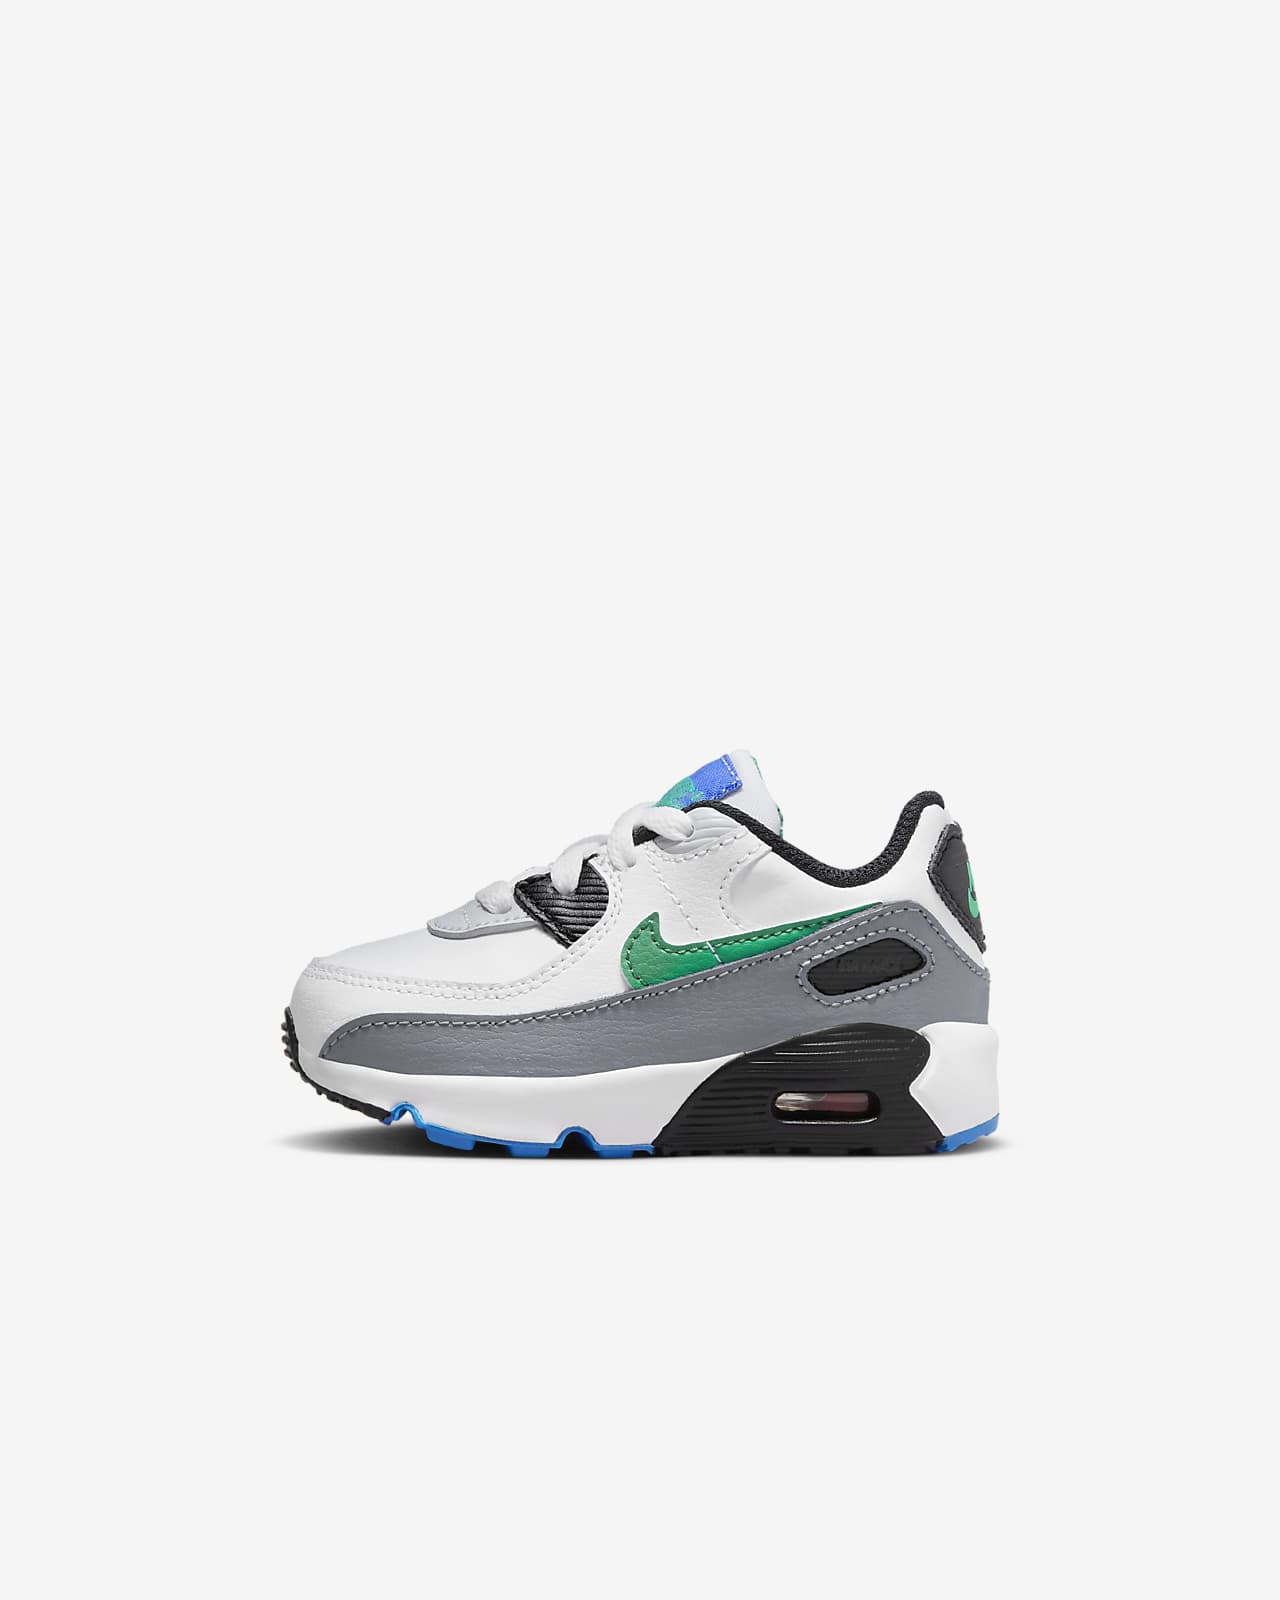 Nike Air Max 90 LTR Baby/Toddler Shoes. 